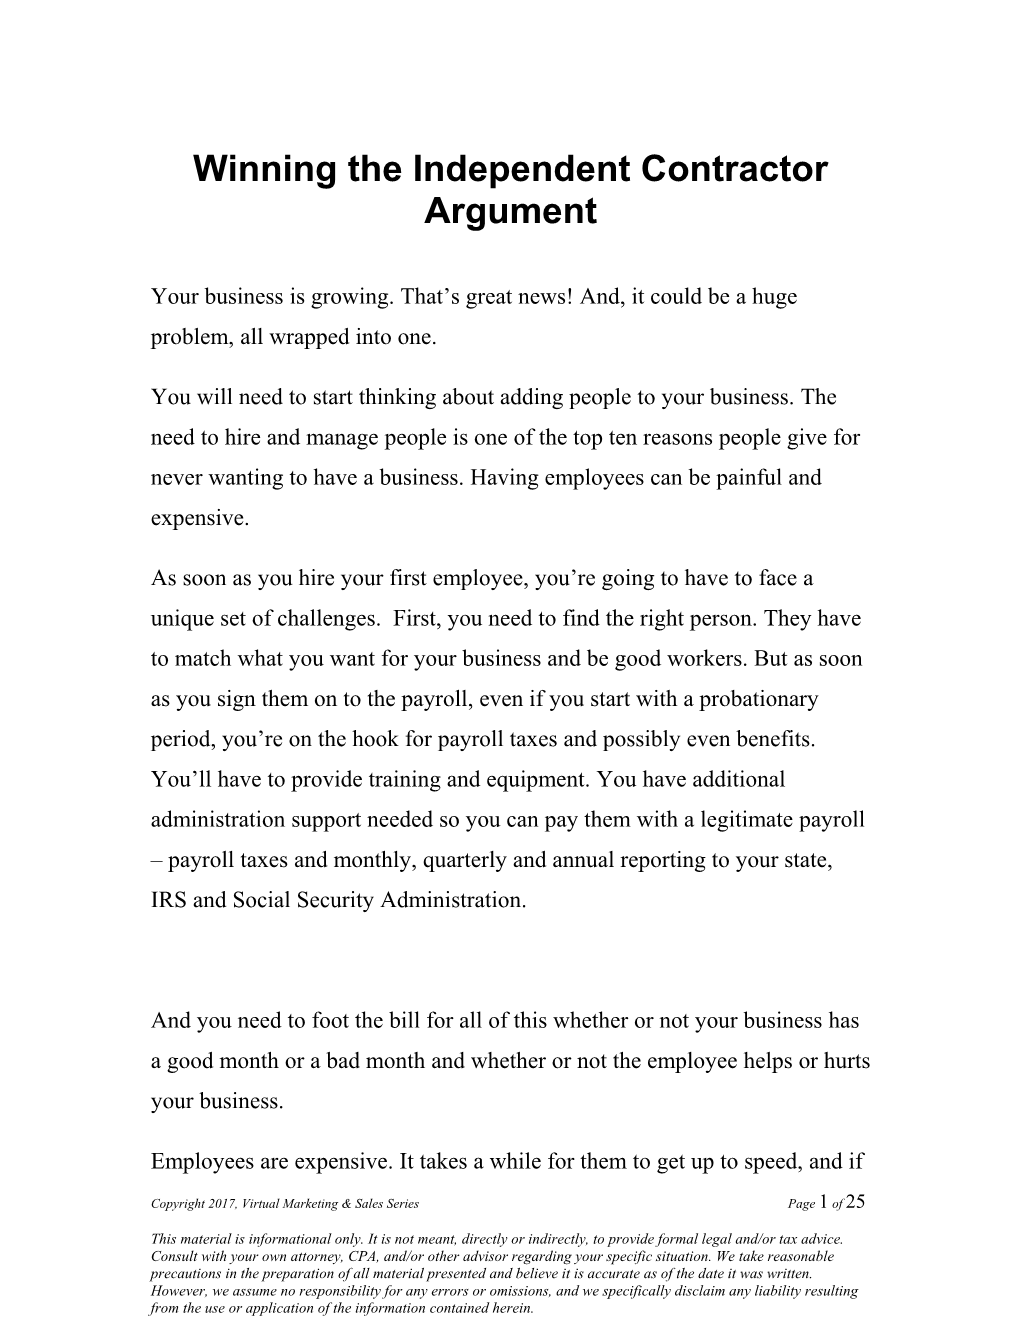 Winning the Independent Contractor Argument